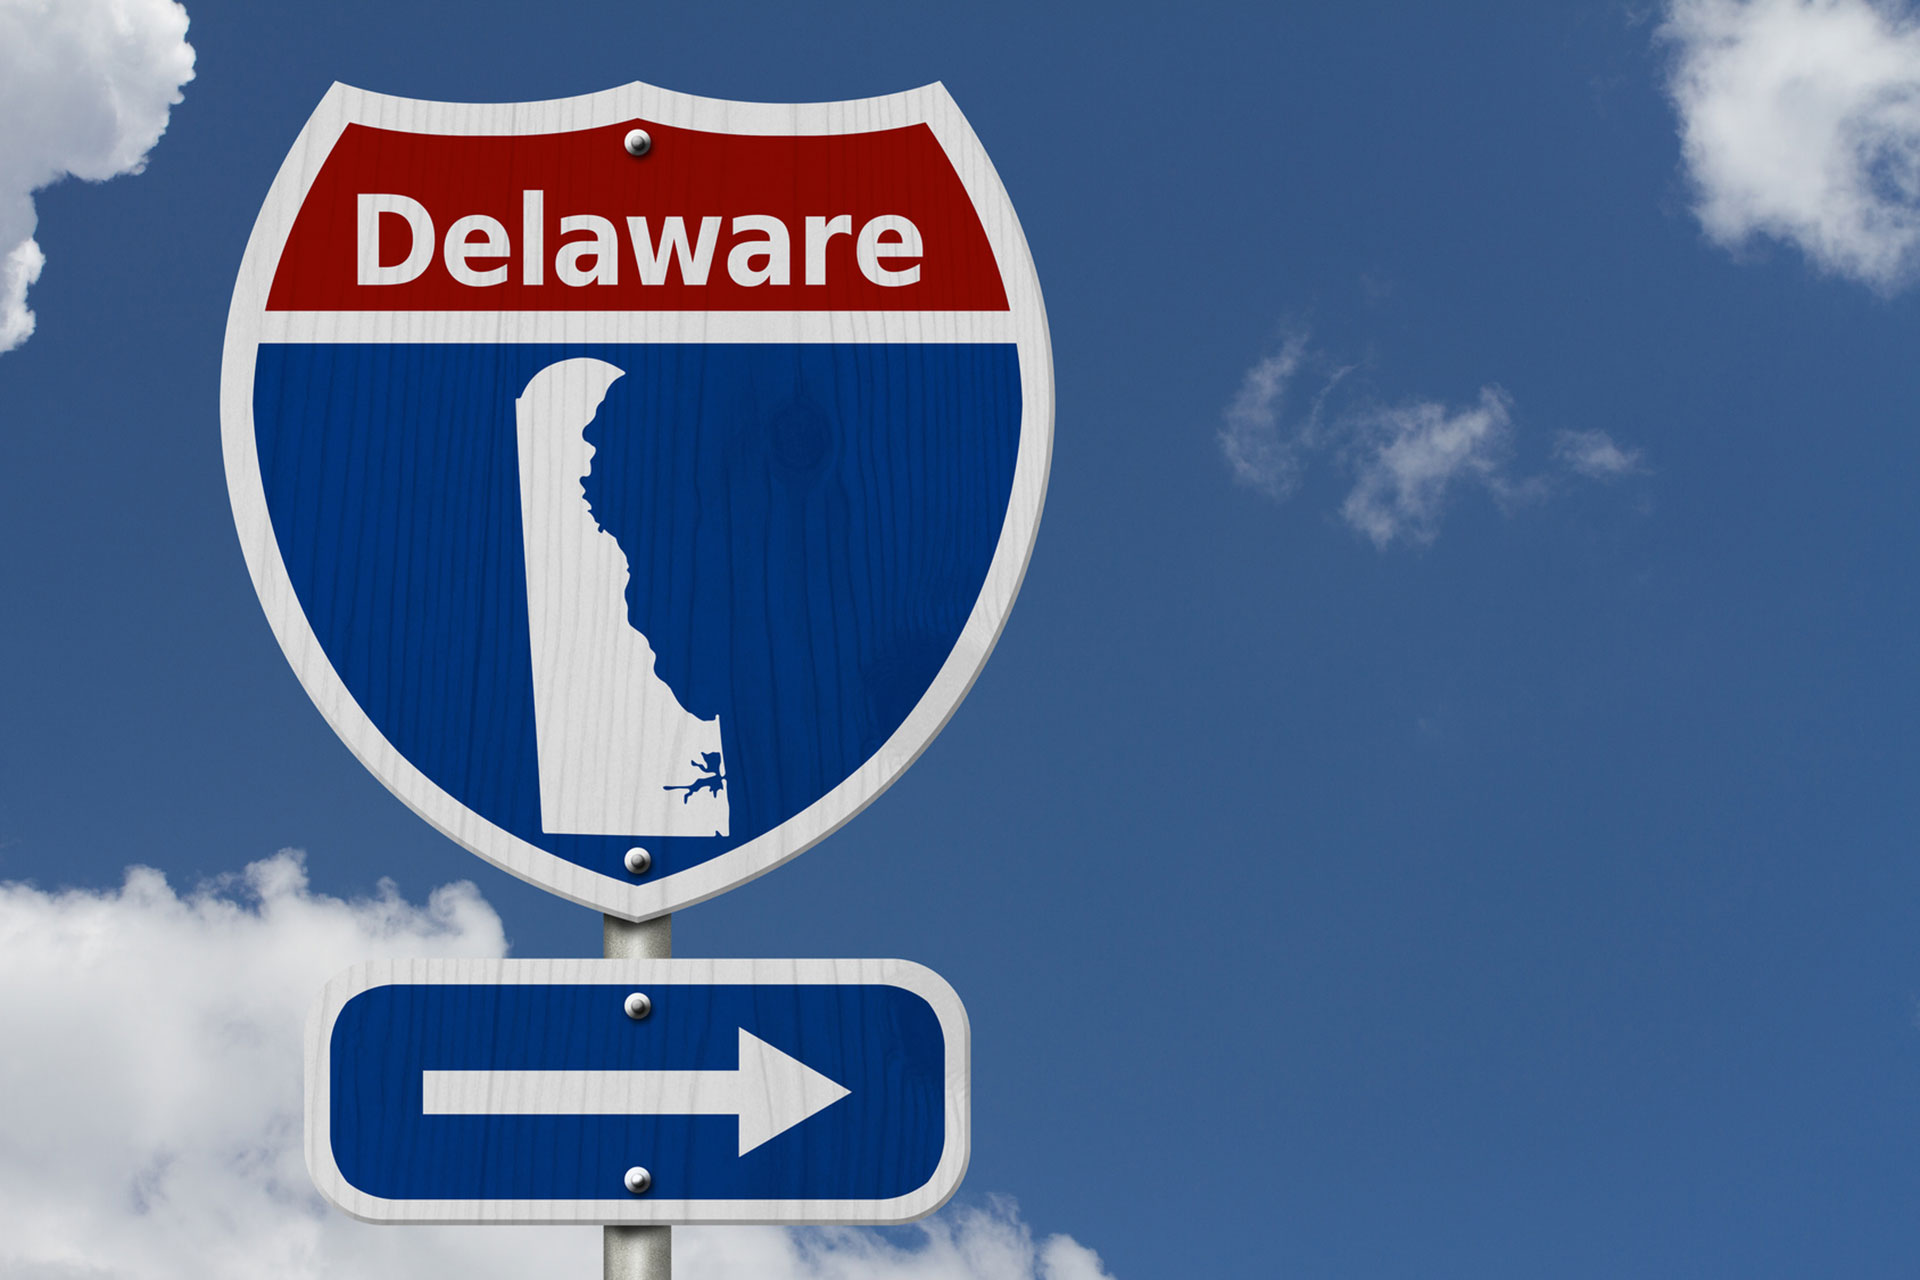 Doing business in Delaware is easy with CT Corporation's support